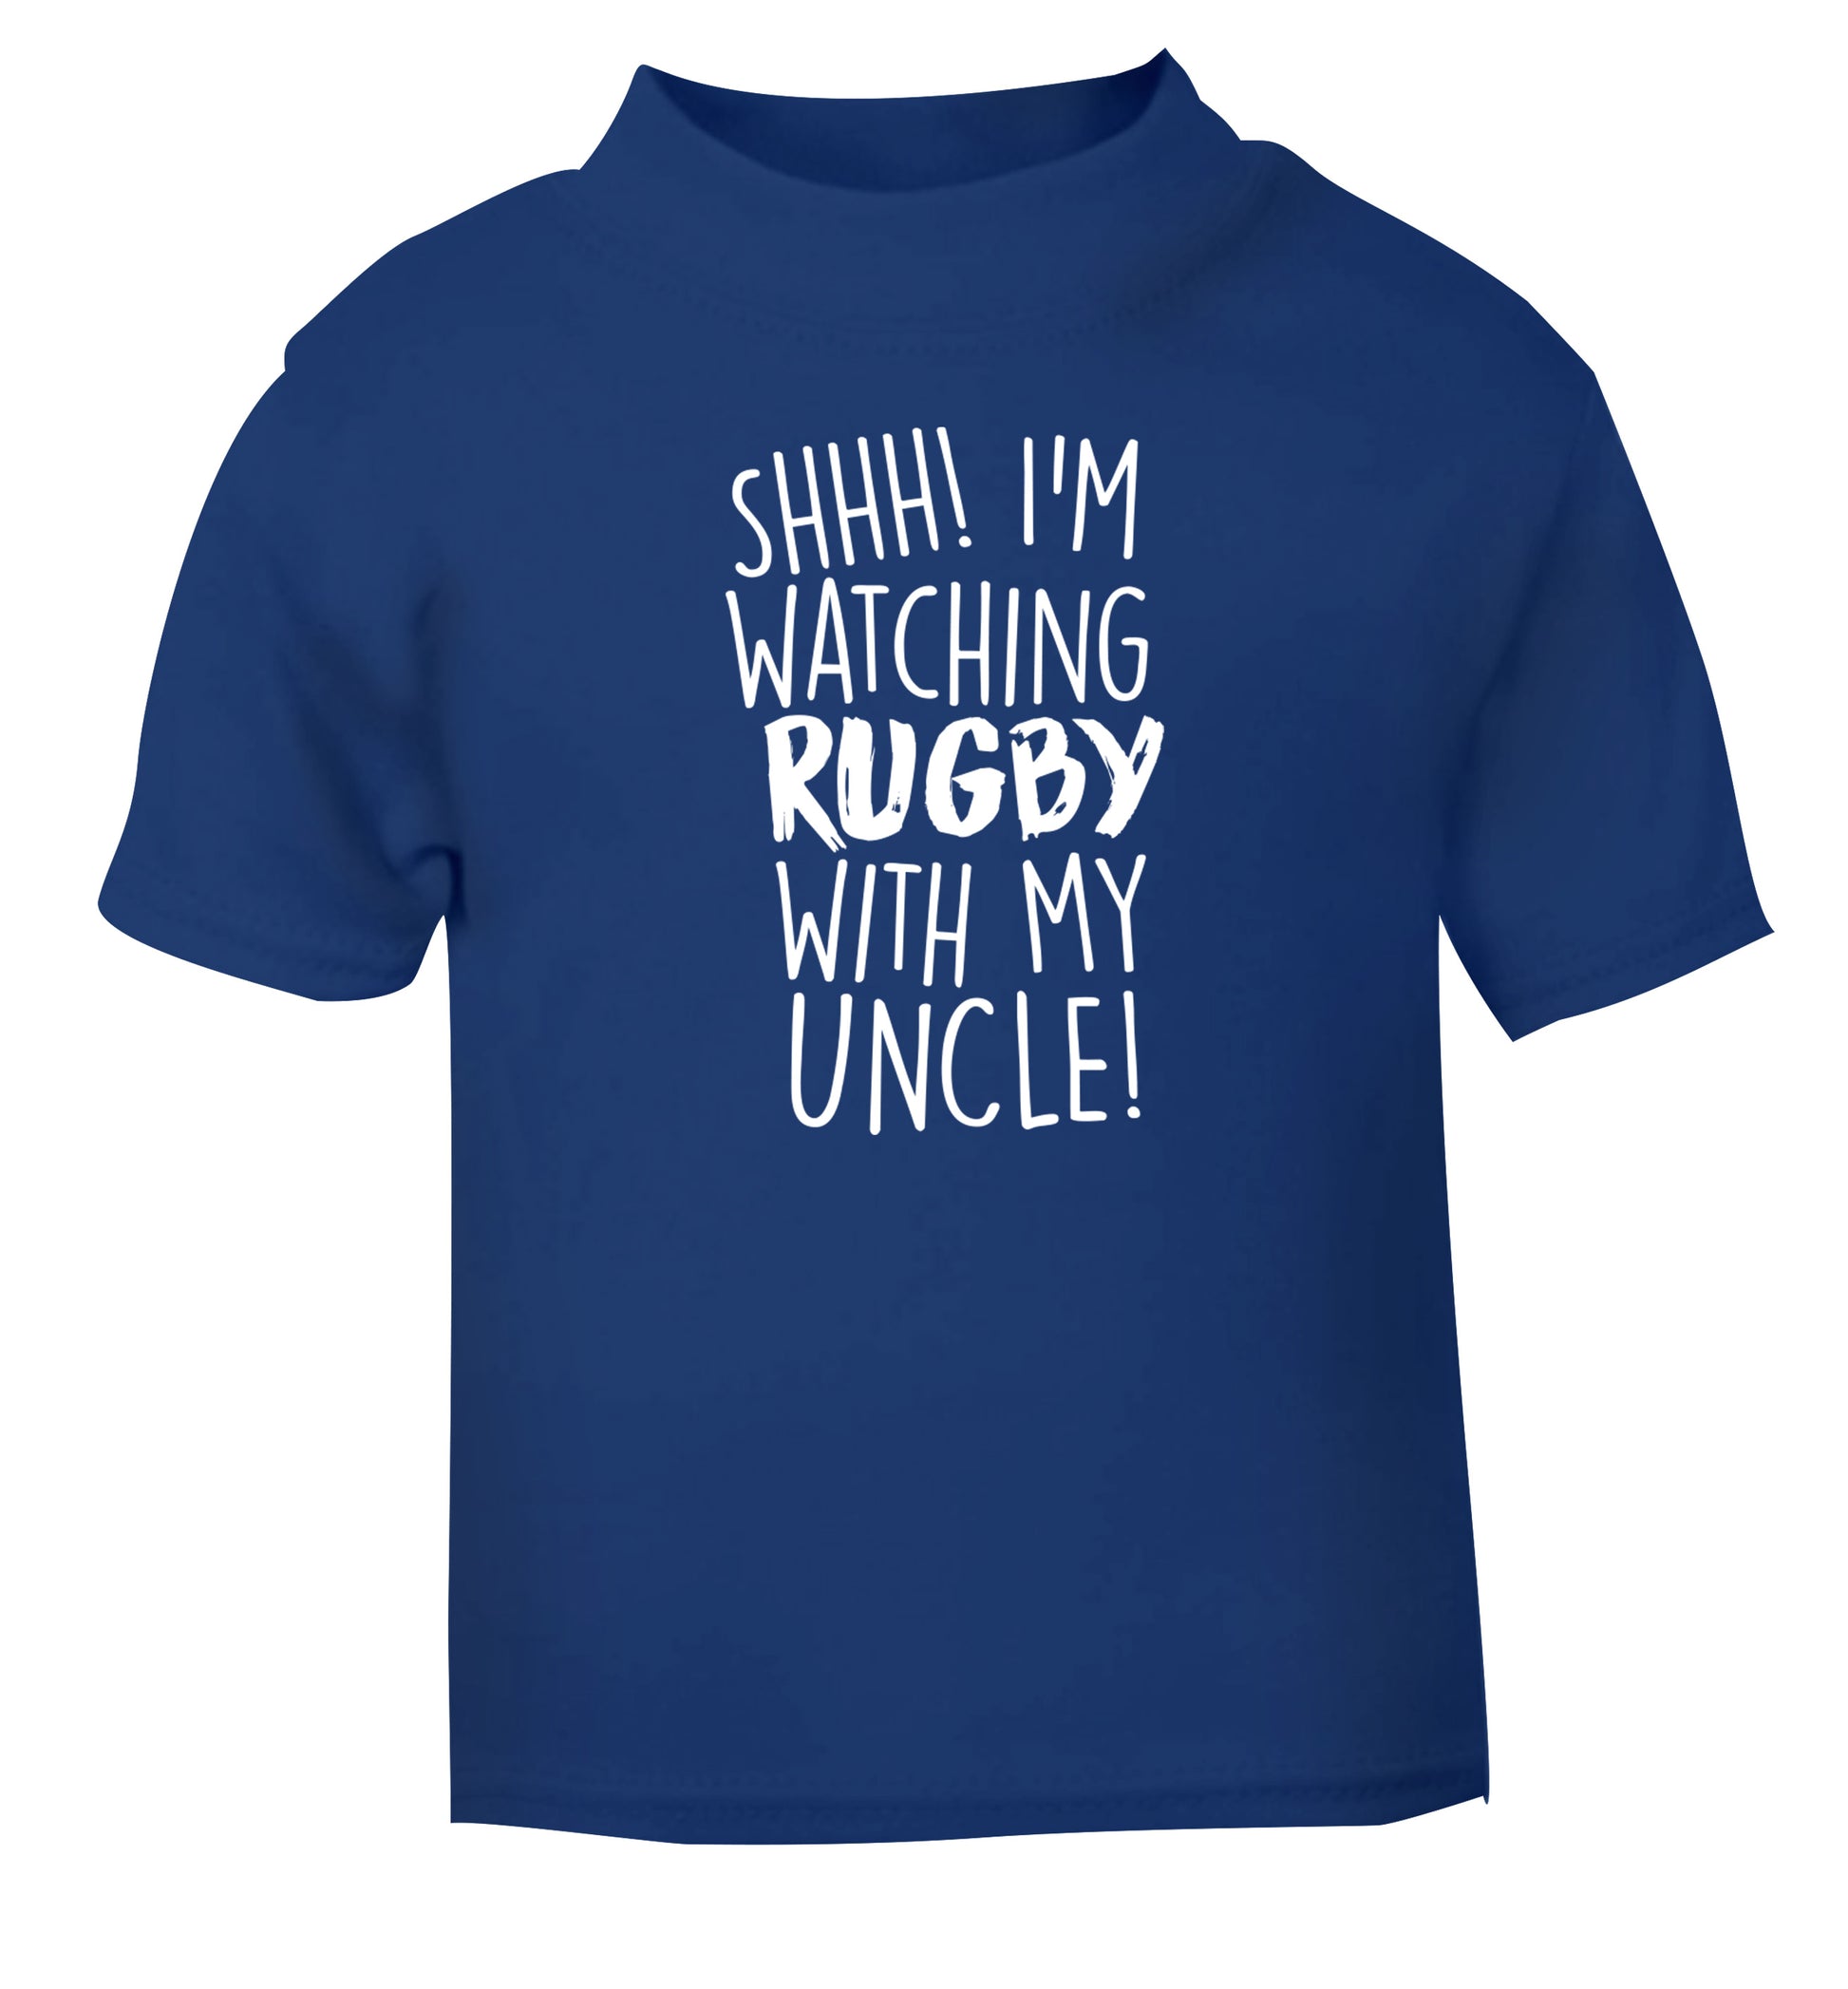 Shh.. I'm watching rugby with my uncle blue Baby Toddler Tshirt 2 Years